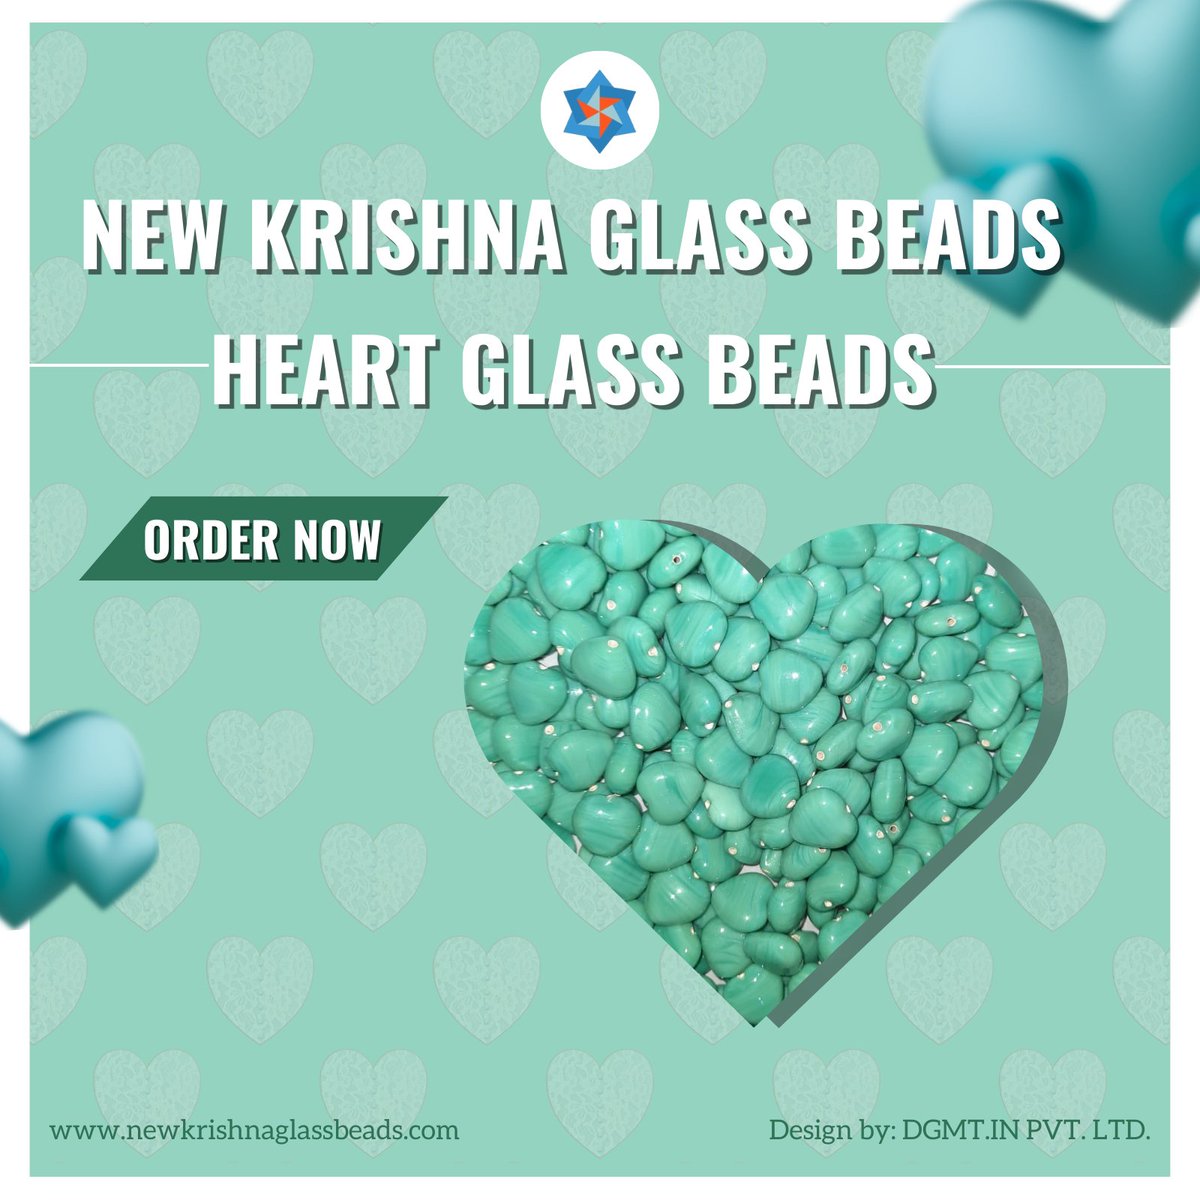 Introducing Krishna Glass Beads - your top-tier exporter of stunning heart glass beads across the globe! 💖✨ Transform your creations with our dazzling designs. 

#NewKrishnaGlassBeads #KrishnaGlassBeads #HeartBeads #GlobalCrafting #HeartfeltStyle #LoveInEveryBead #heartbracelet